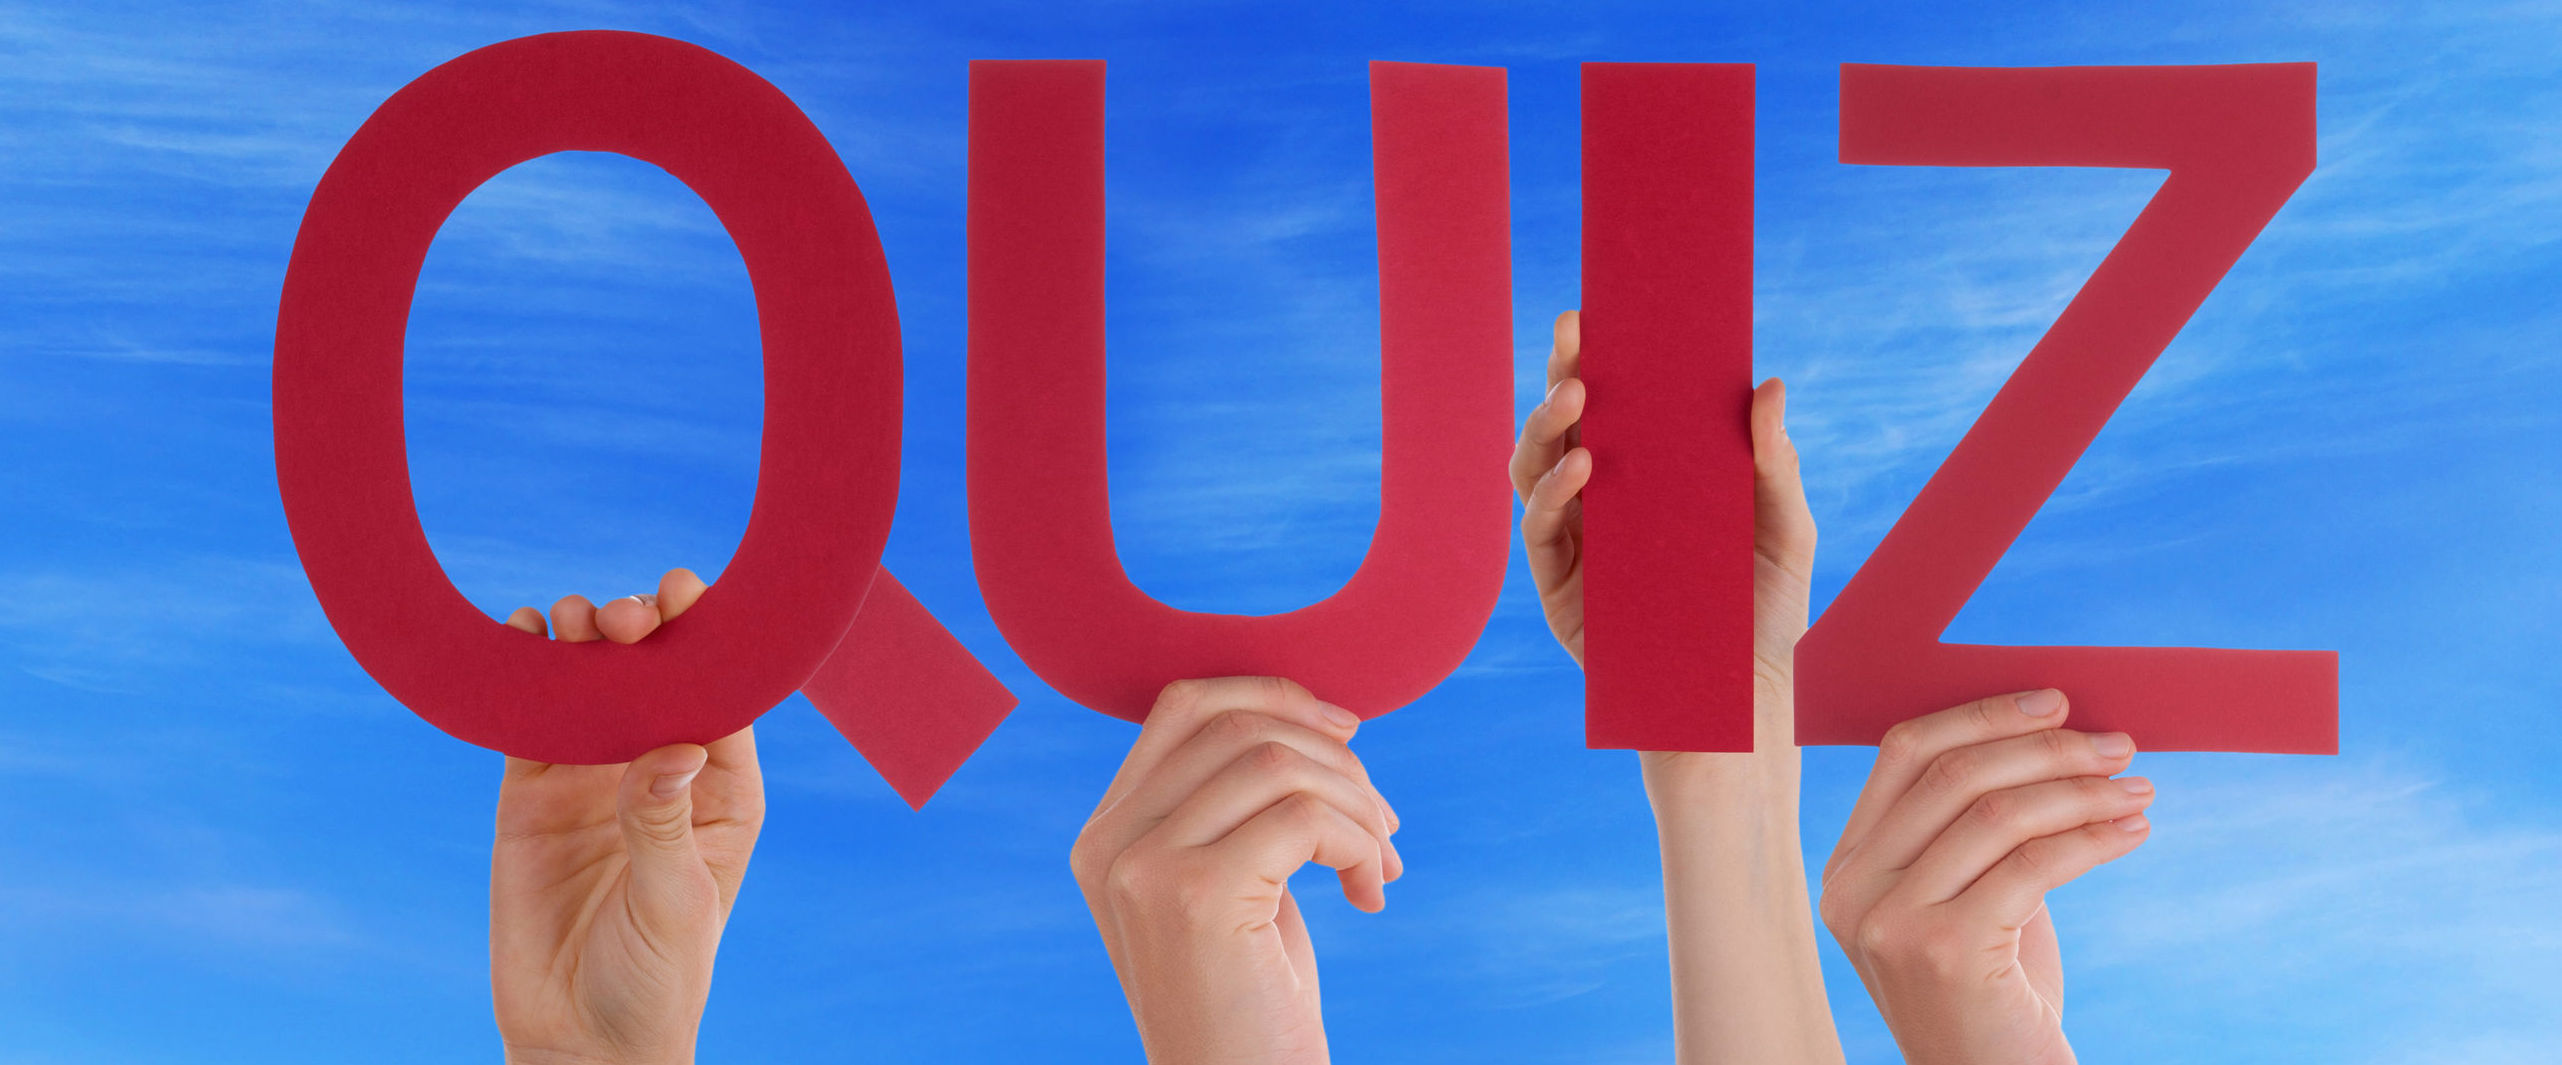 39221049 - many caucasian people and hands holding red straight letters or characters building the english word quiz on blue sky